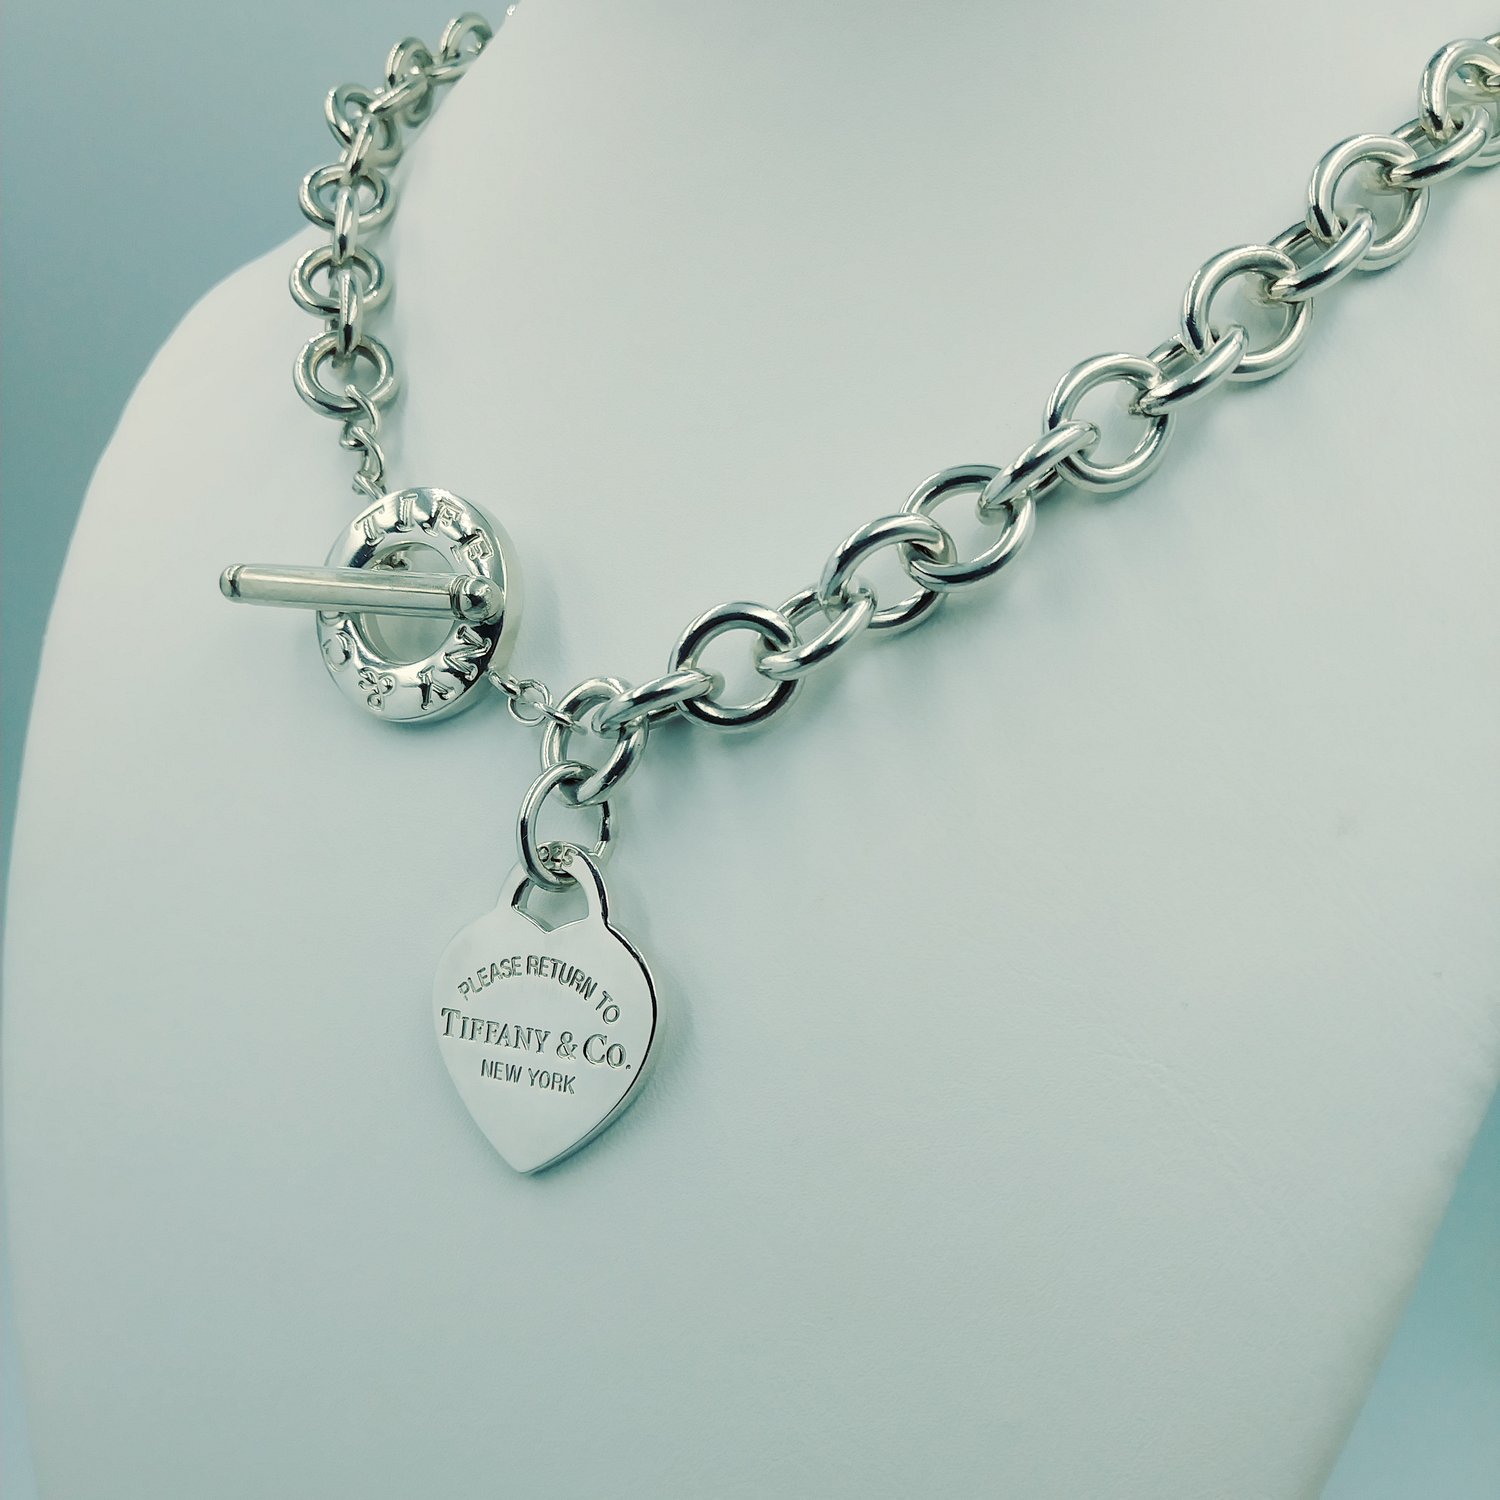 Vintage Authentic Tiffany & Co Toggle Heart Tag Necklace Sterling Silver 16